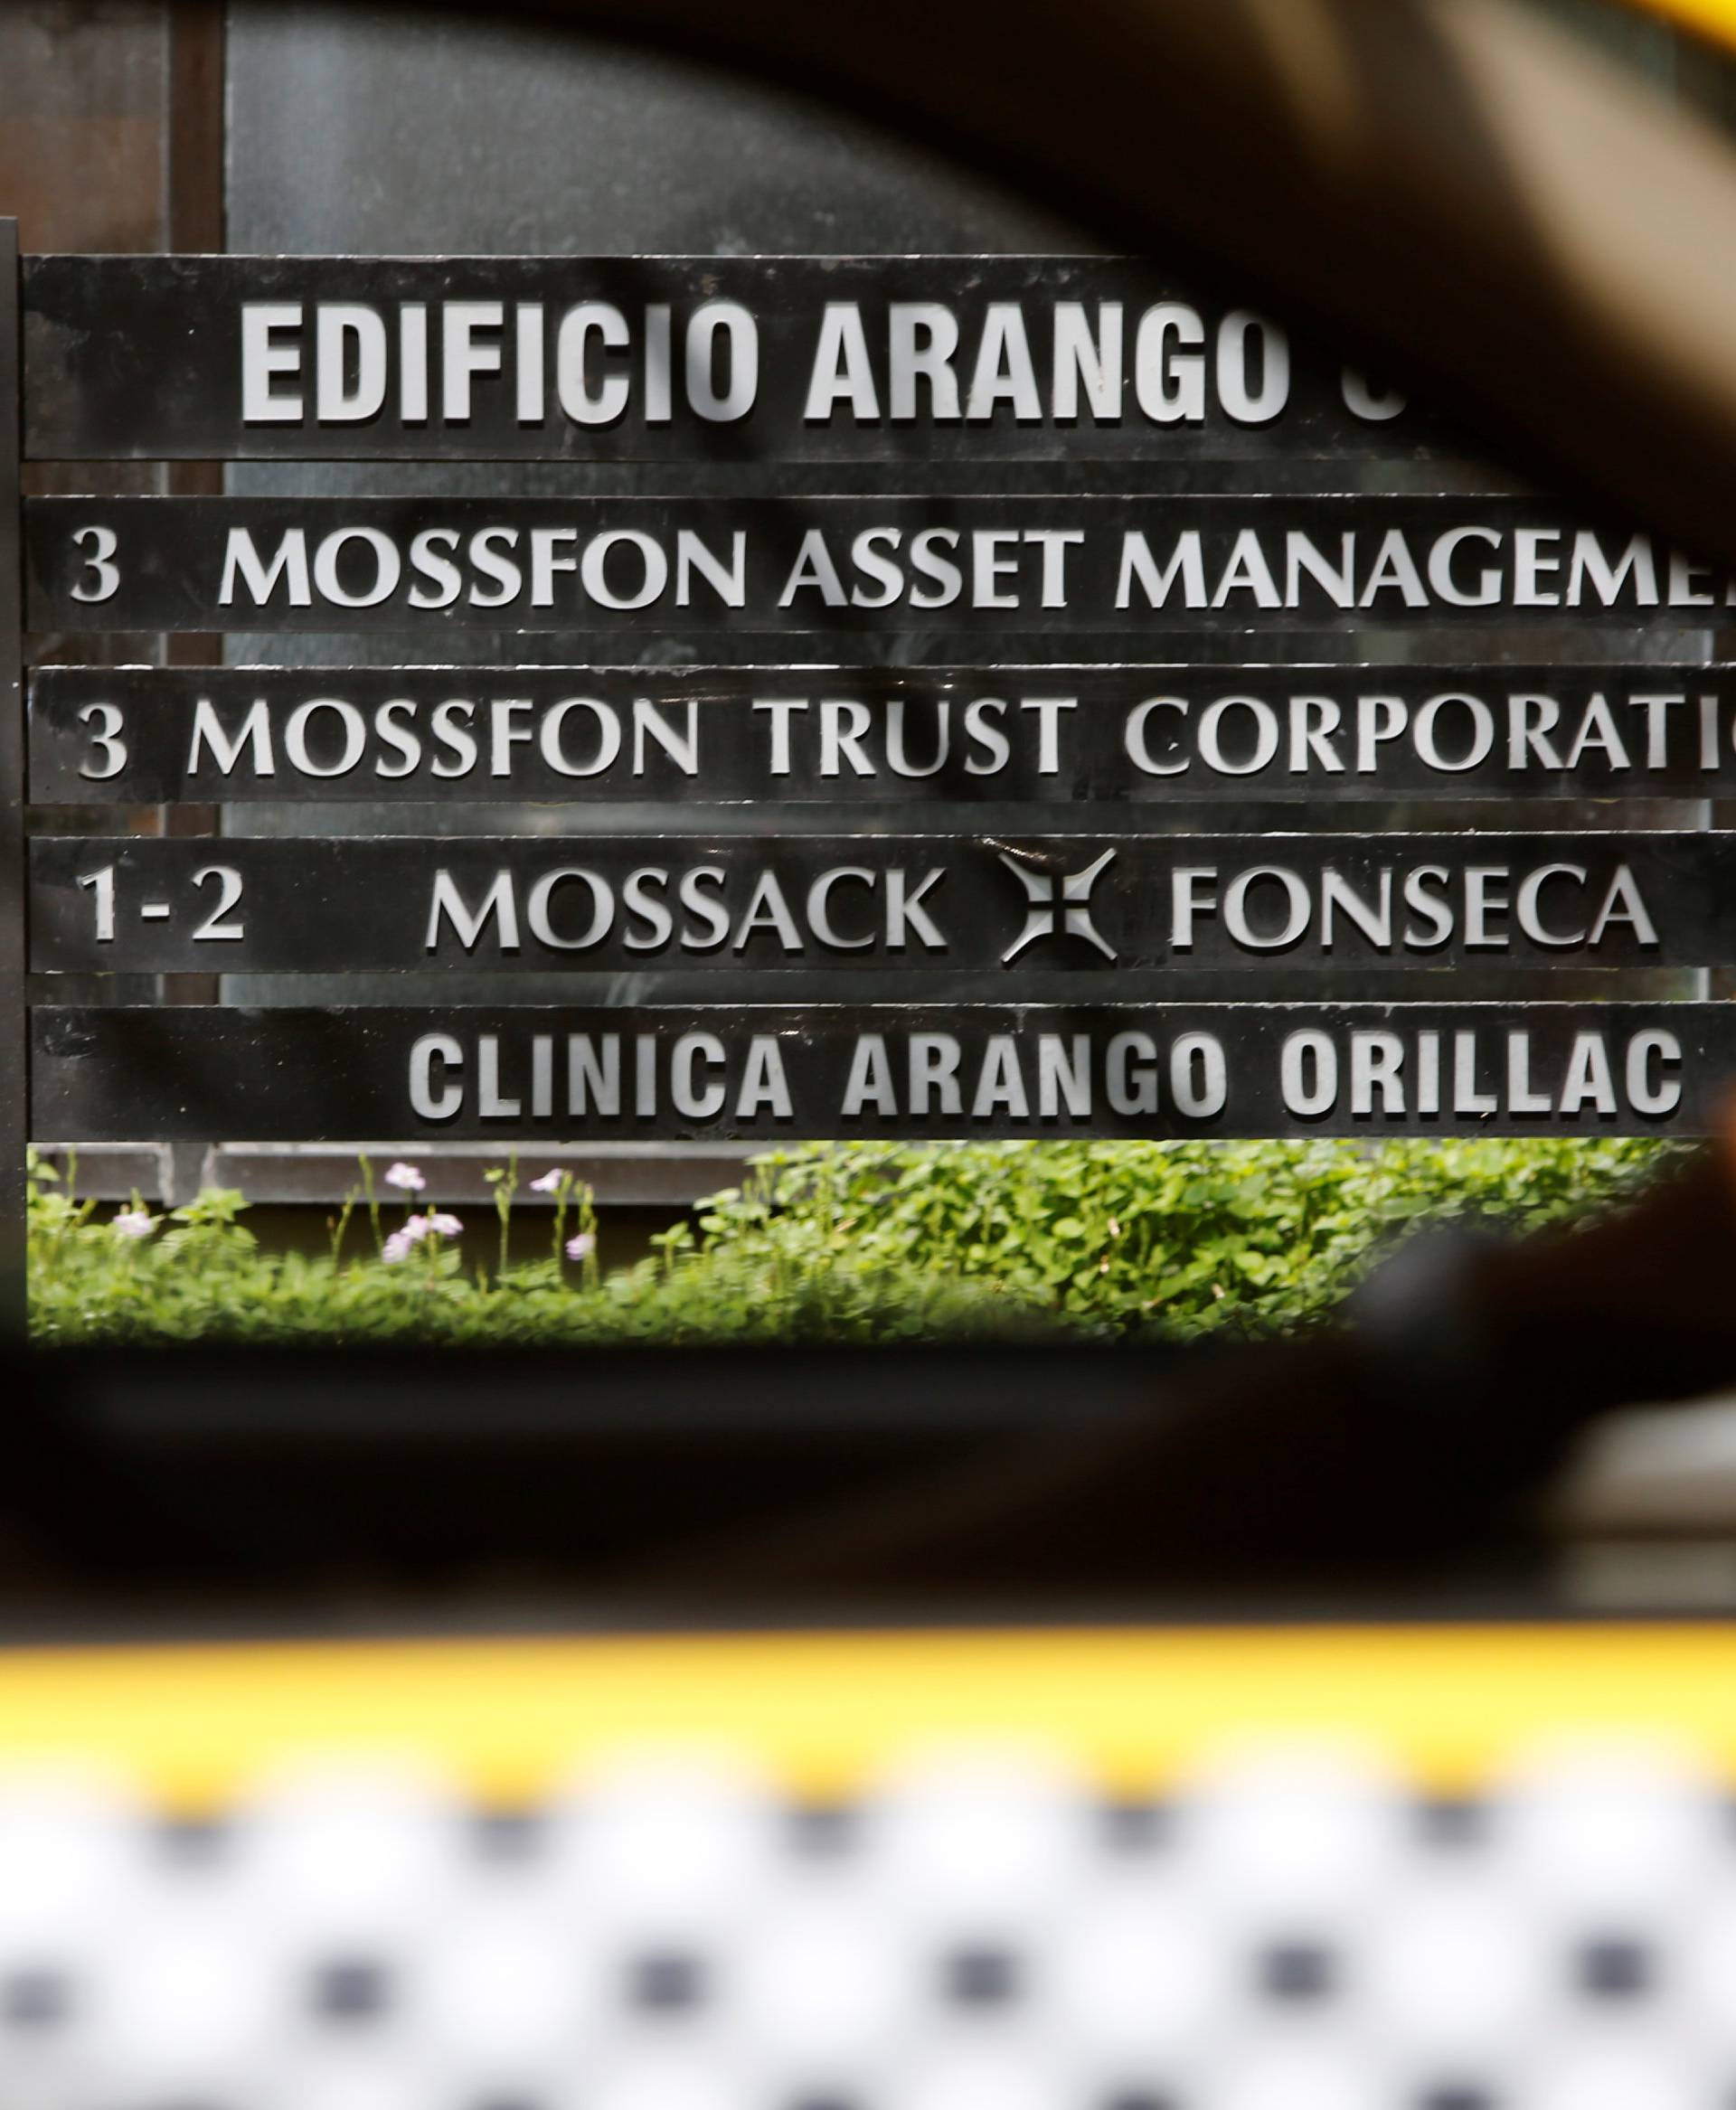 A taxi pass a company list showing the Mossack Fonseca law firm at the Arango Orillac Building in Panama City